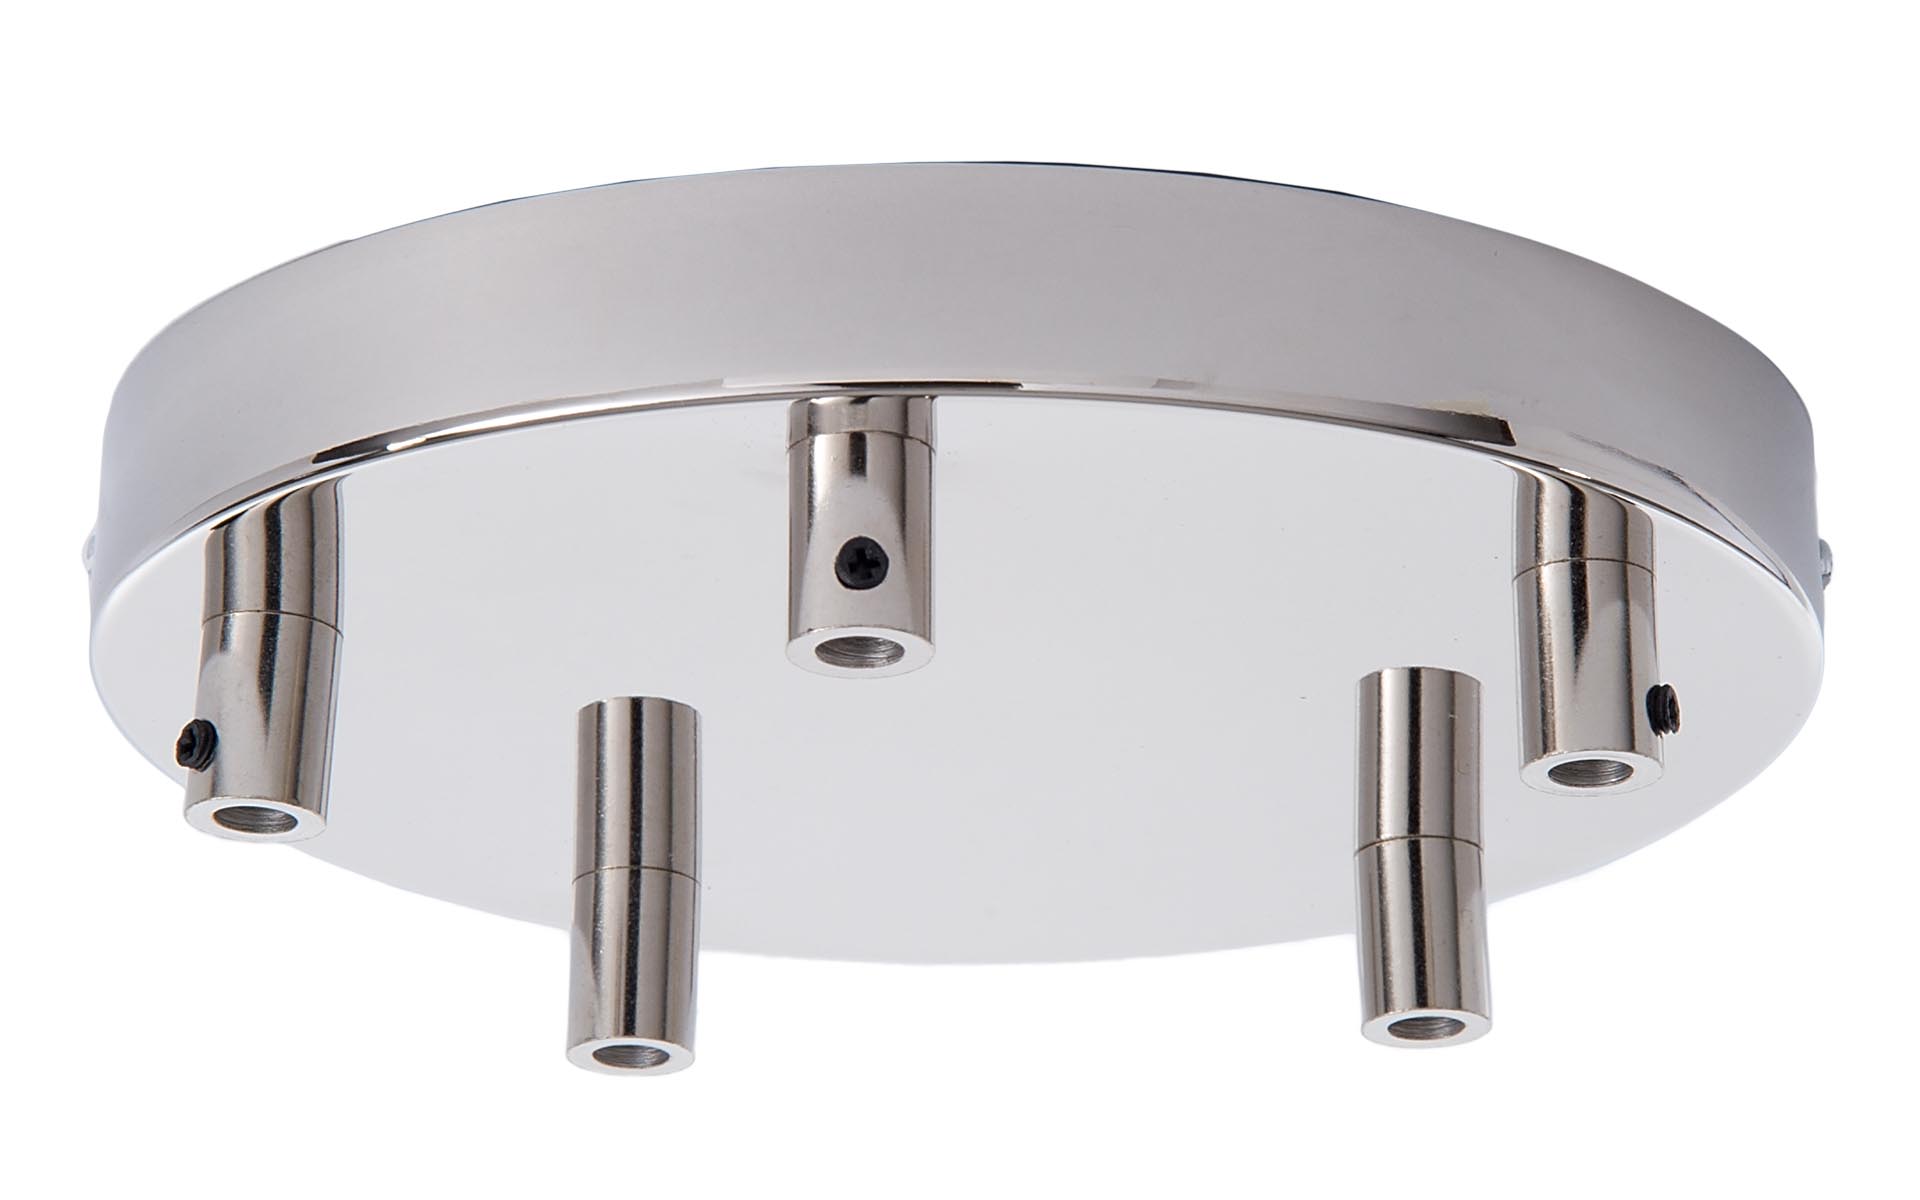 5-Port Lighting Fixture Canopy Kit with Nickel Plated Finish